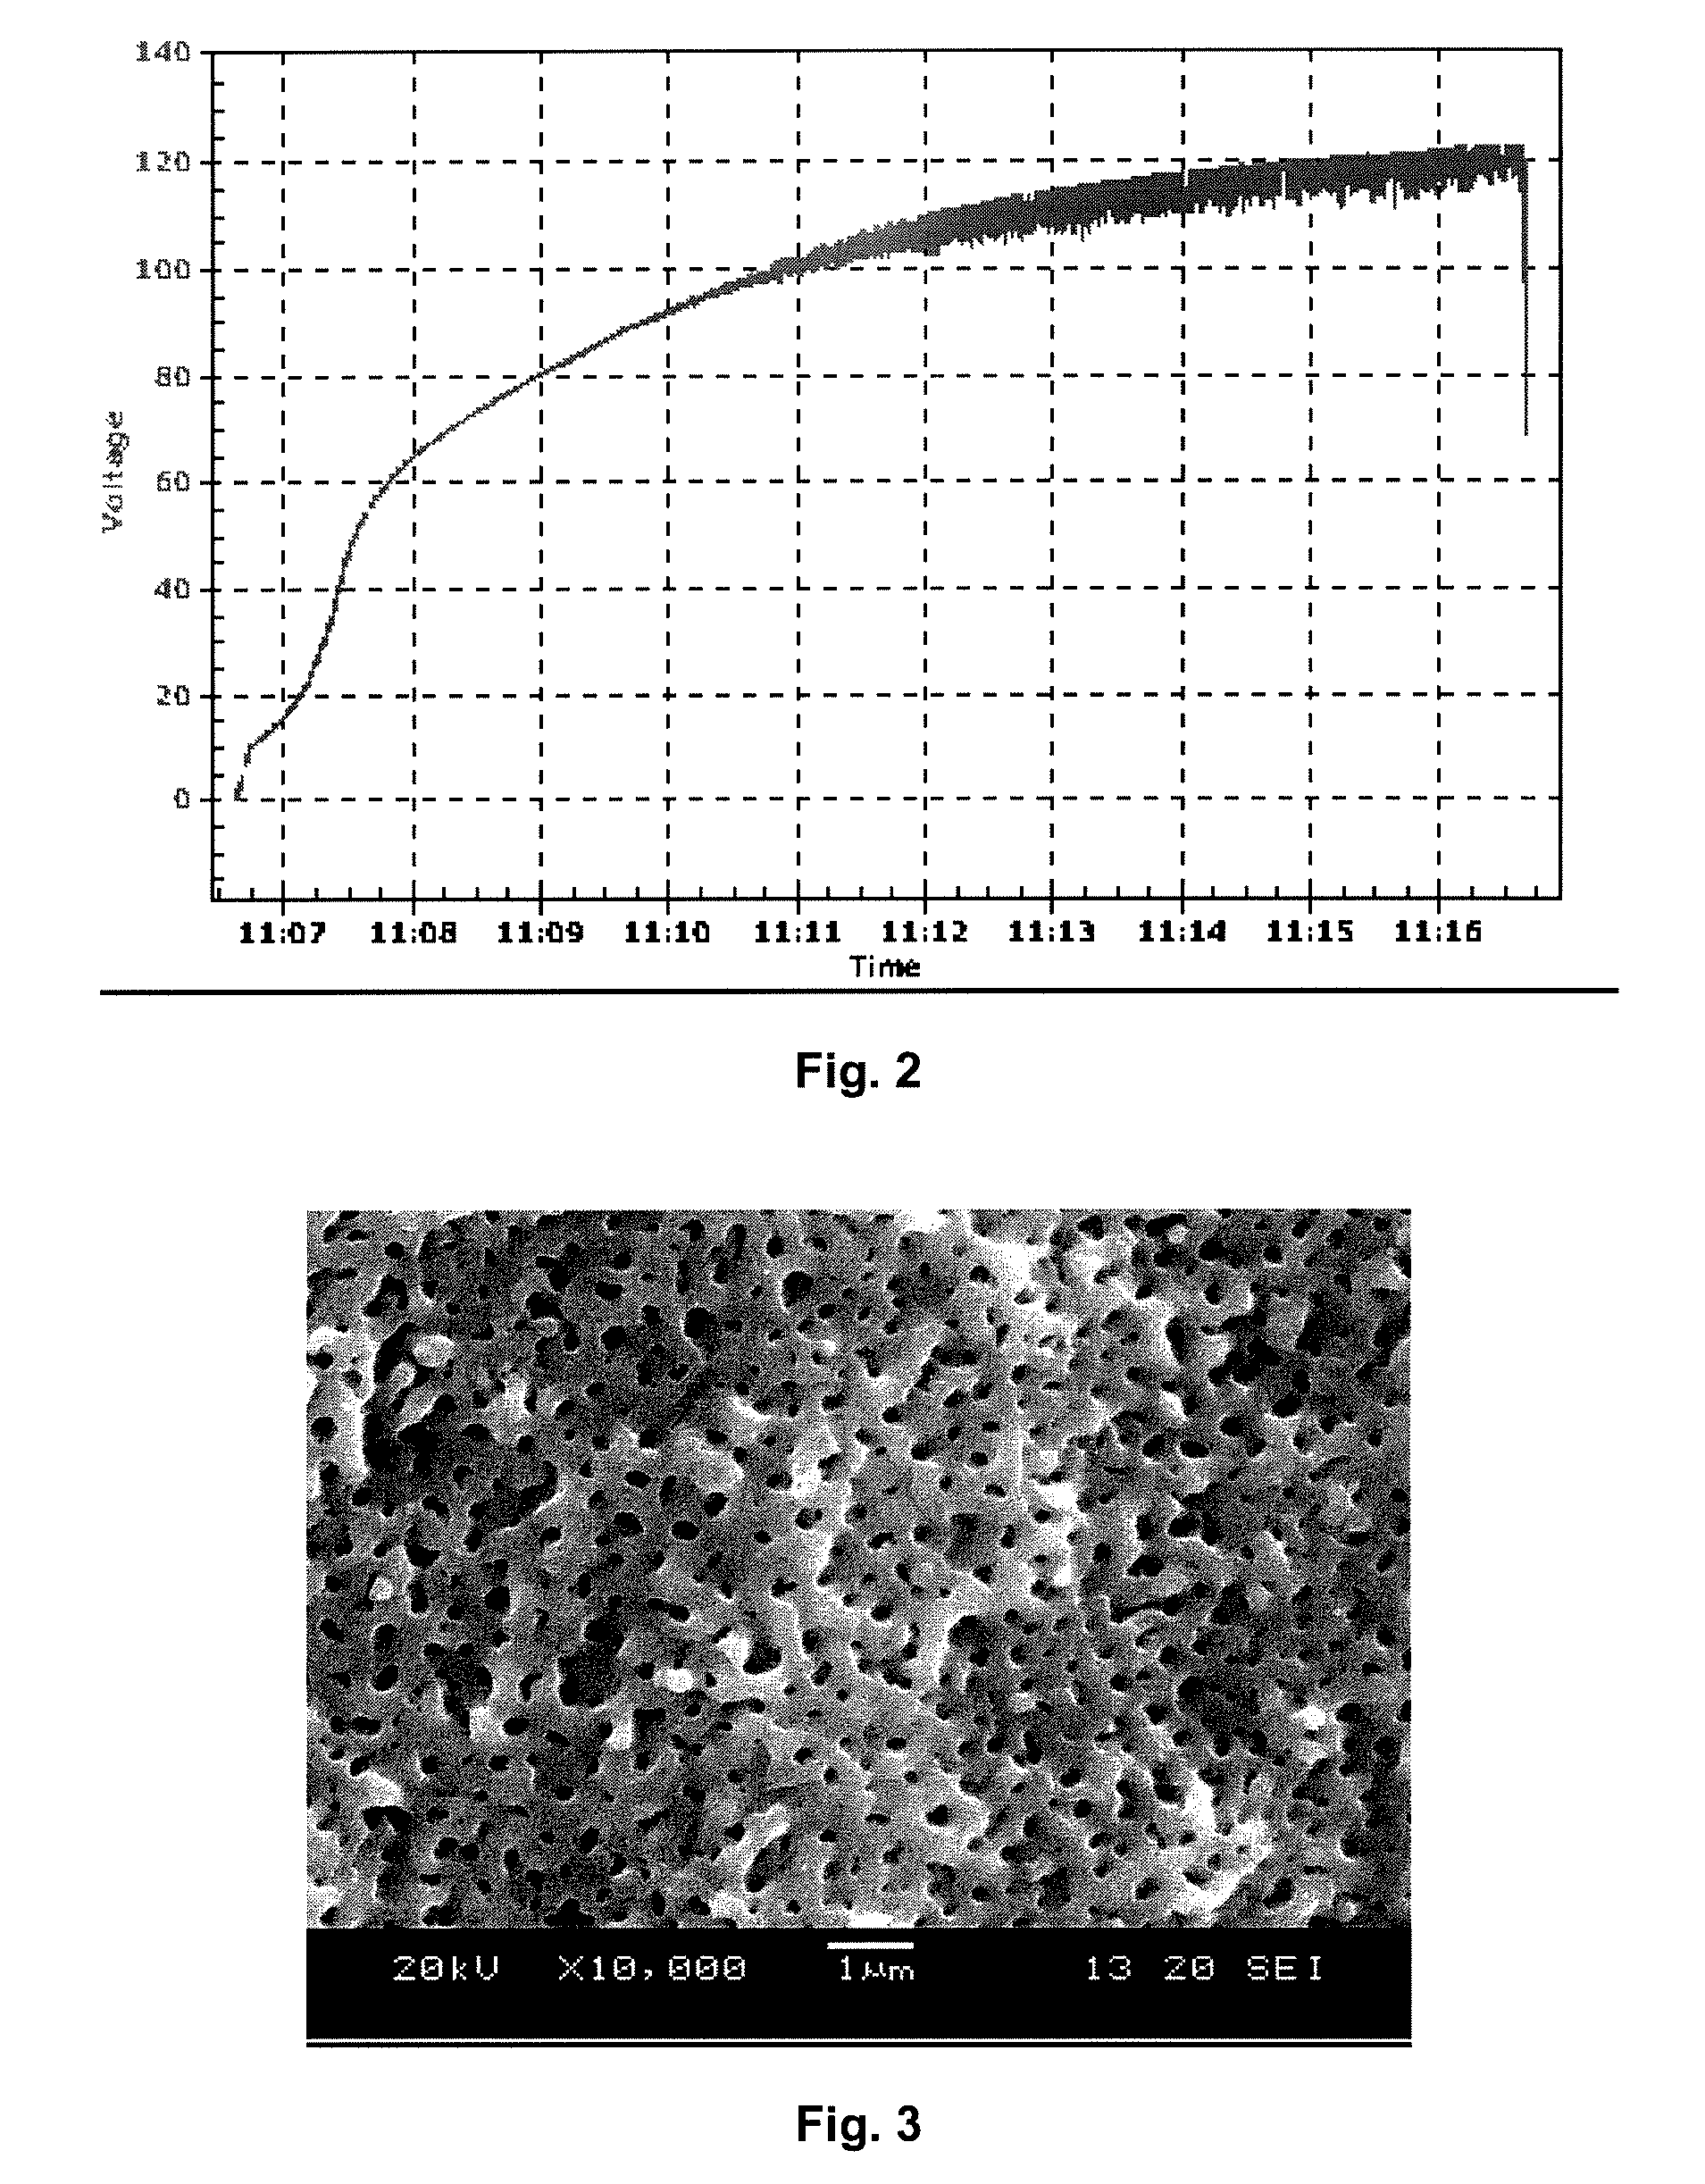 Substrate for Use in Wet Capacitors